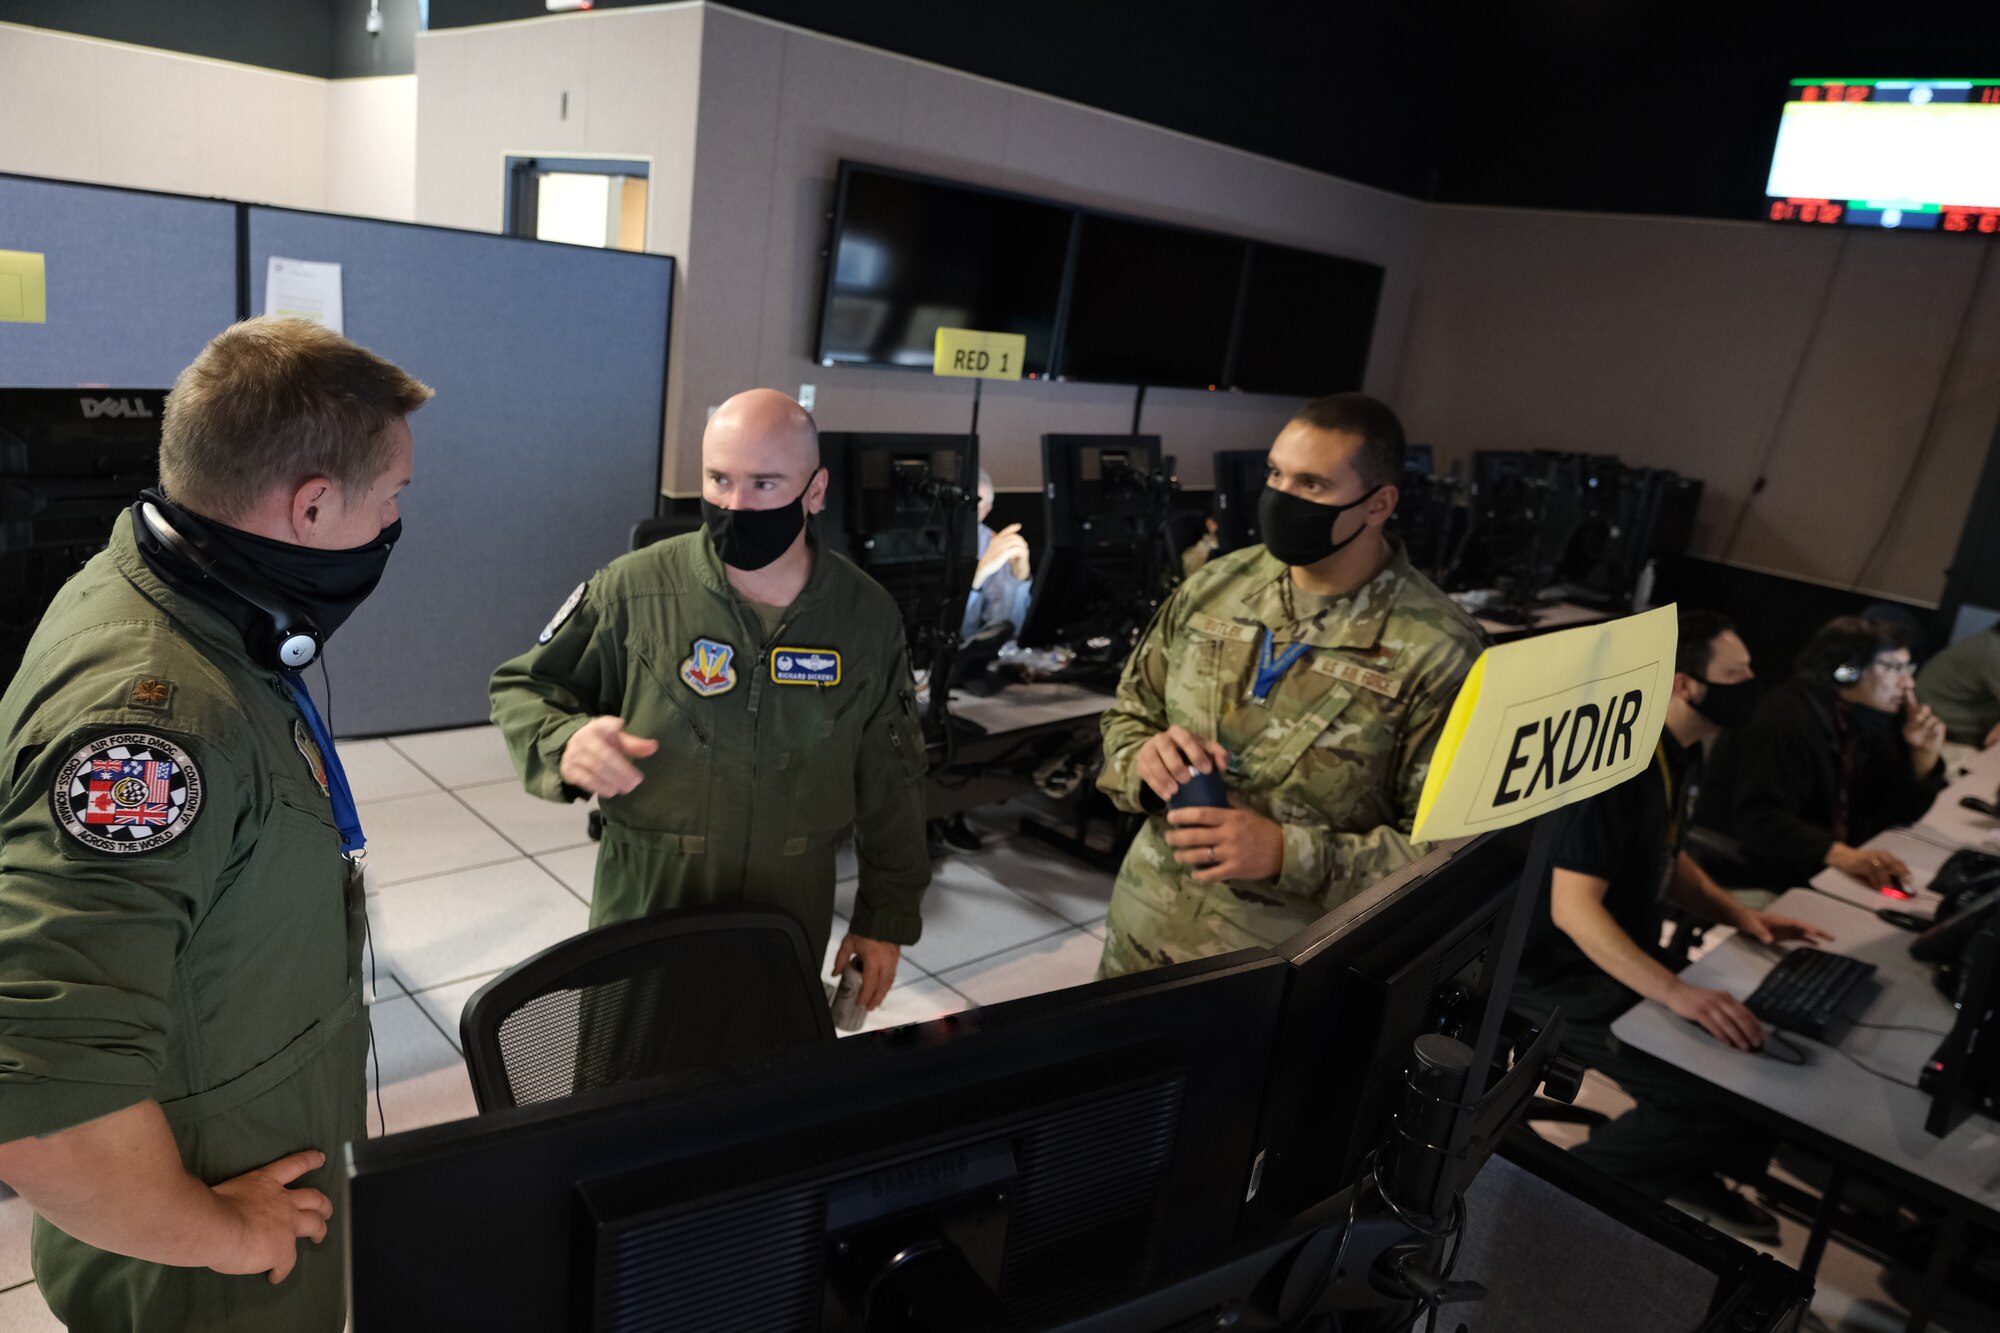 Three U.S. Air Force officers stand in front of computer screens.